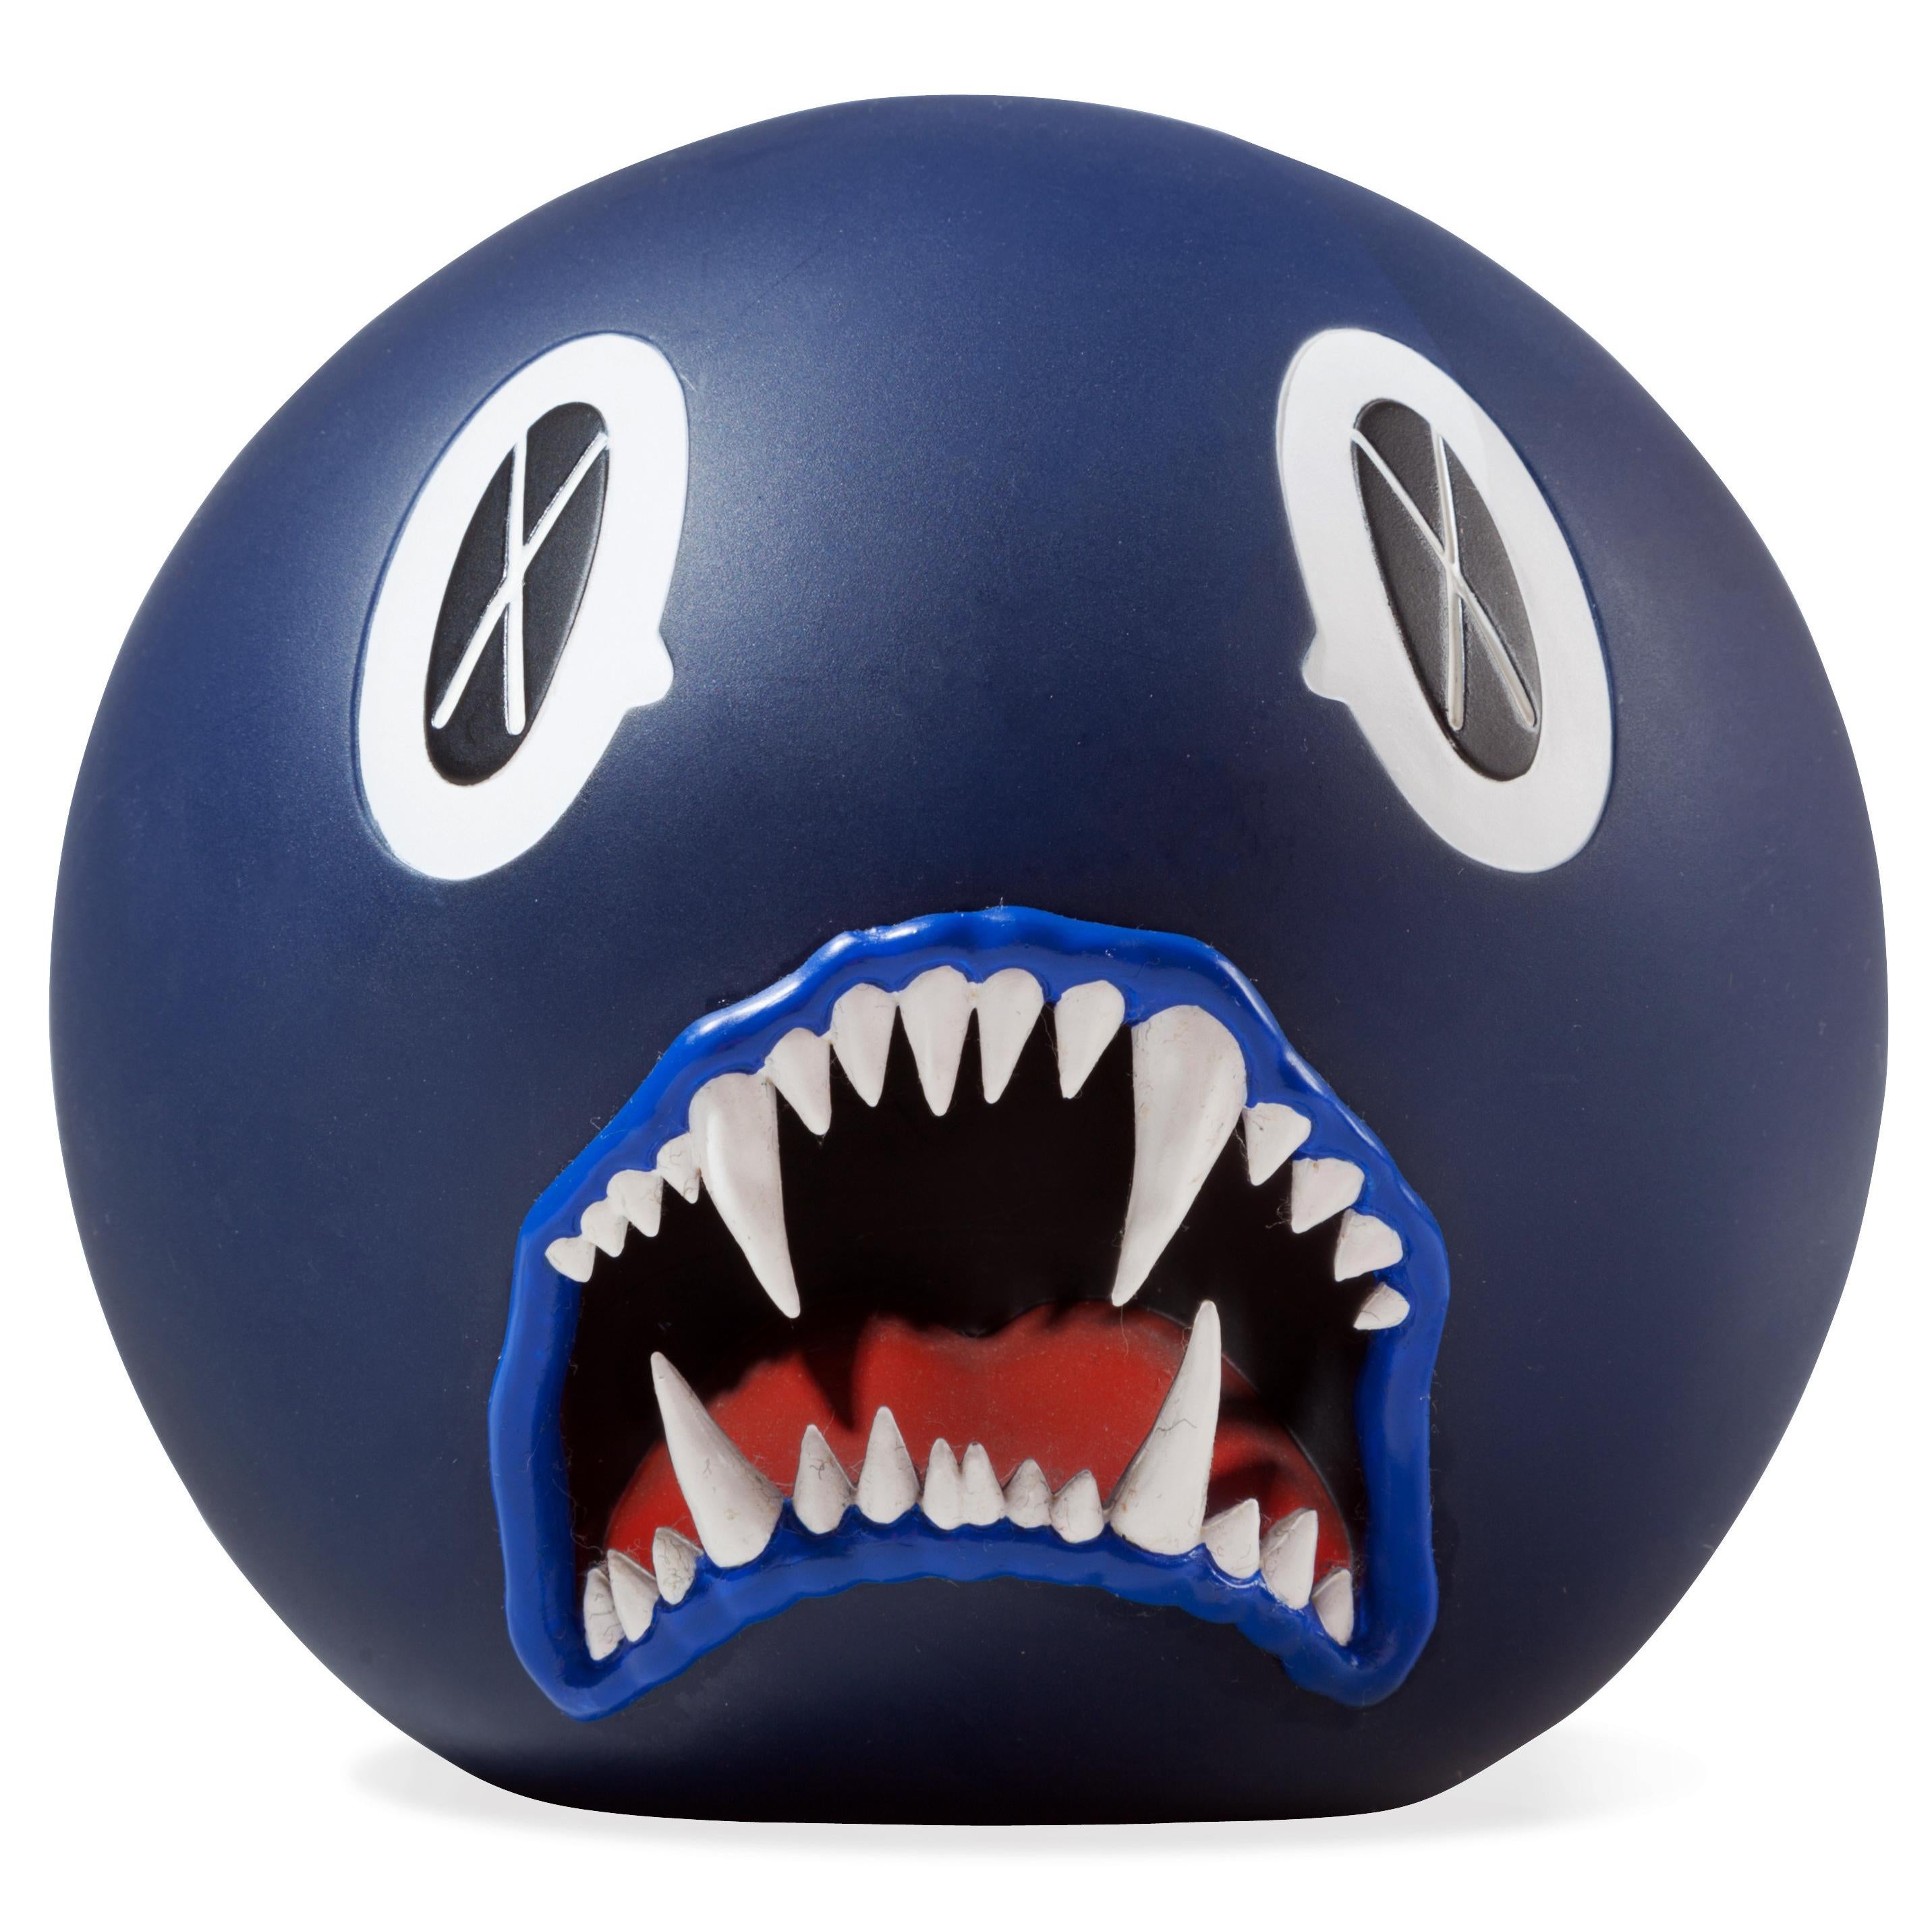 KAWS Cat Teeth Bank (Navy), 2007
"Cat Teeth Bank" was first released in 2007. Subjected to KAWS' signature stylings of an X for each eye, this character maintains a gaping, fanged mouth that can be used to collect change.

Painted cast vinyl. Color: